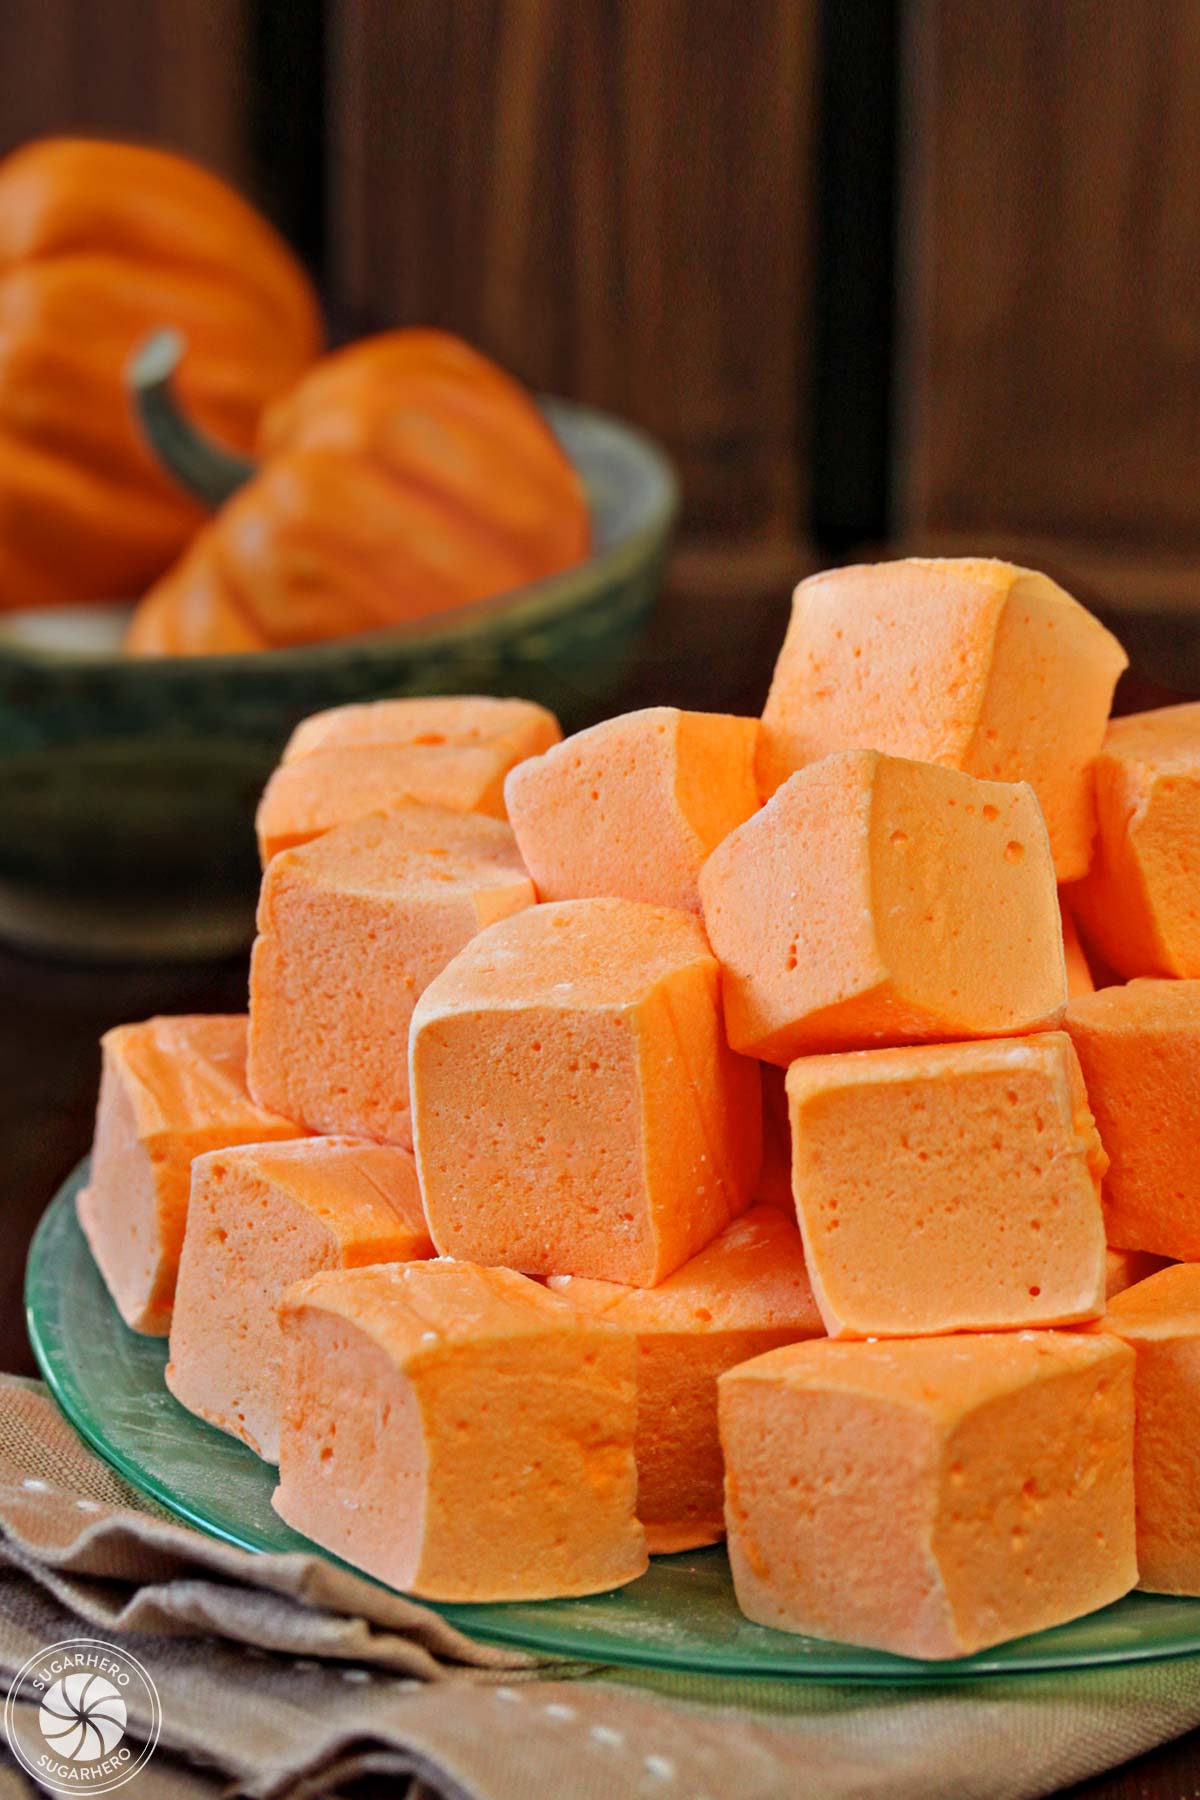 Pile of orange pumpkin marshmallows on a green plate, with small pumpkins in the background.